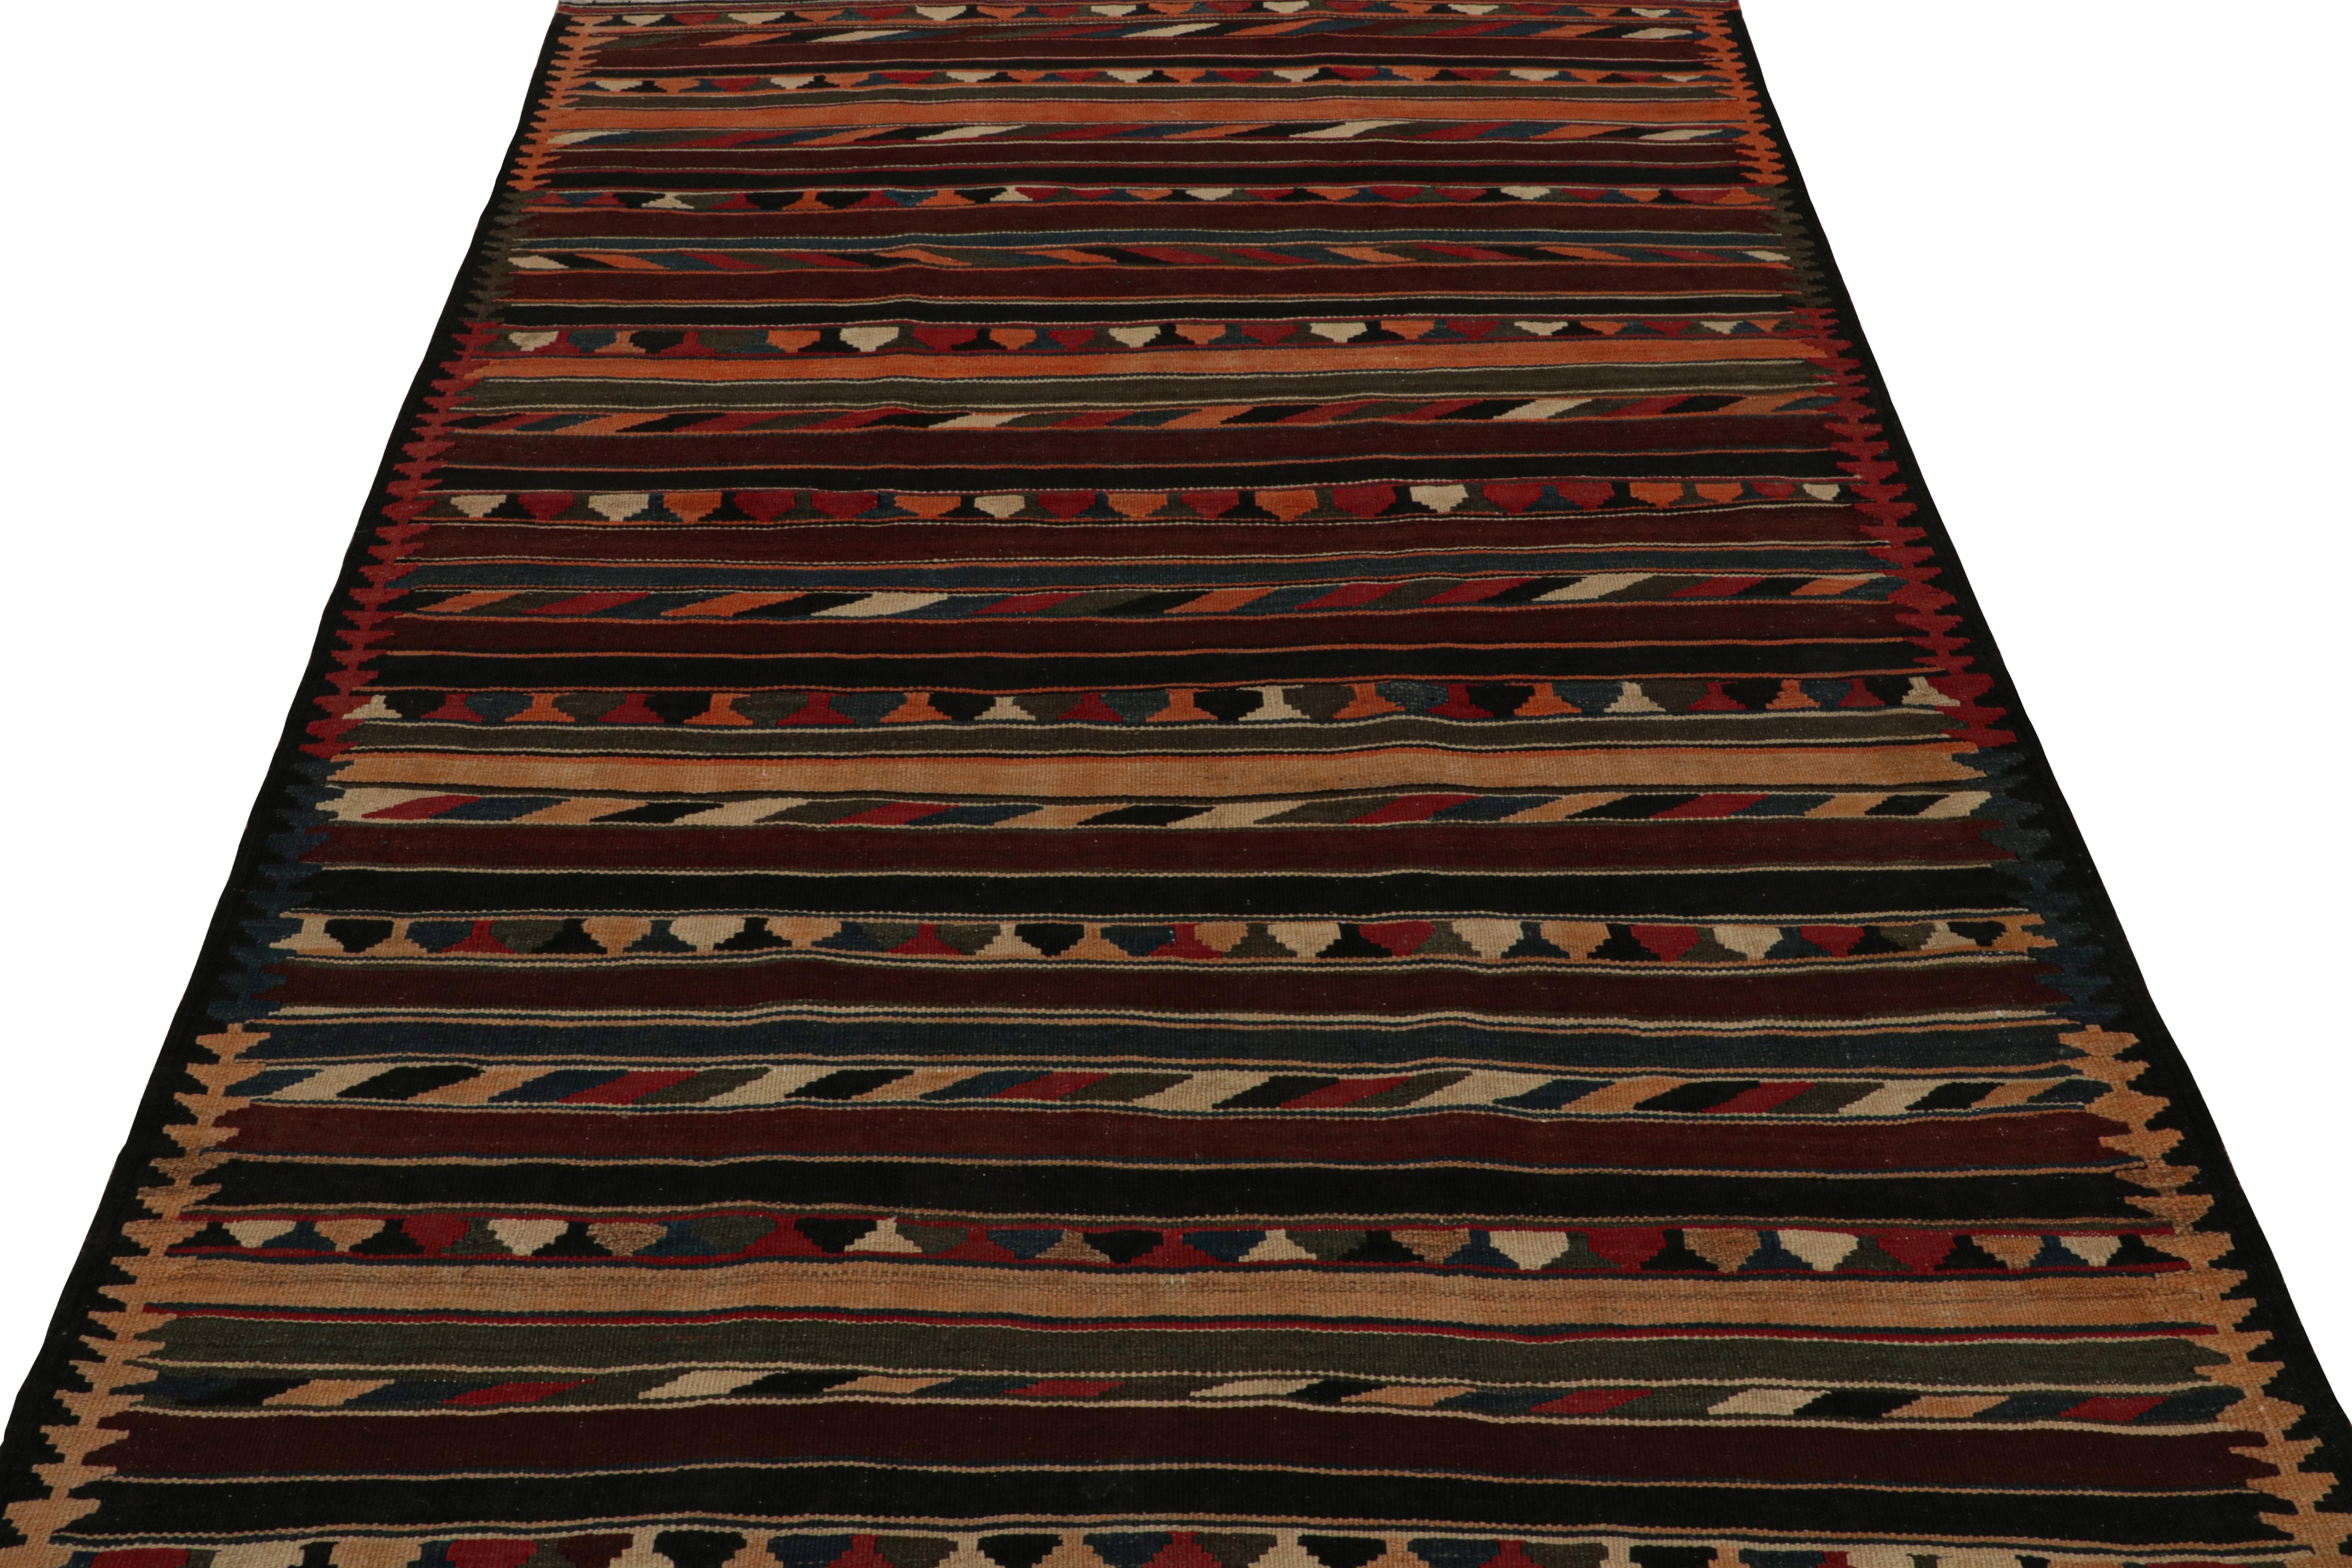 Hand-Woven Vintage Afghan Tribal Kilim in Colorful Geometric Patterns, from Rug & Kilim For Sale